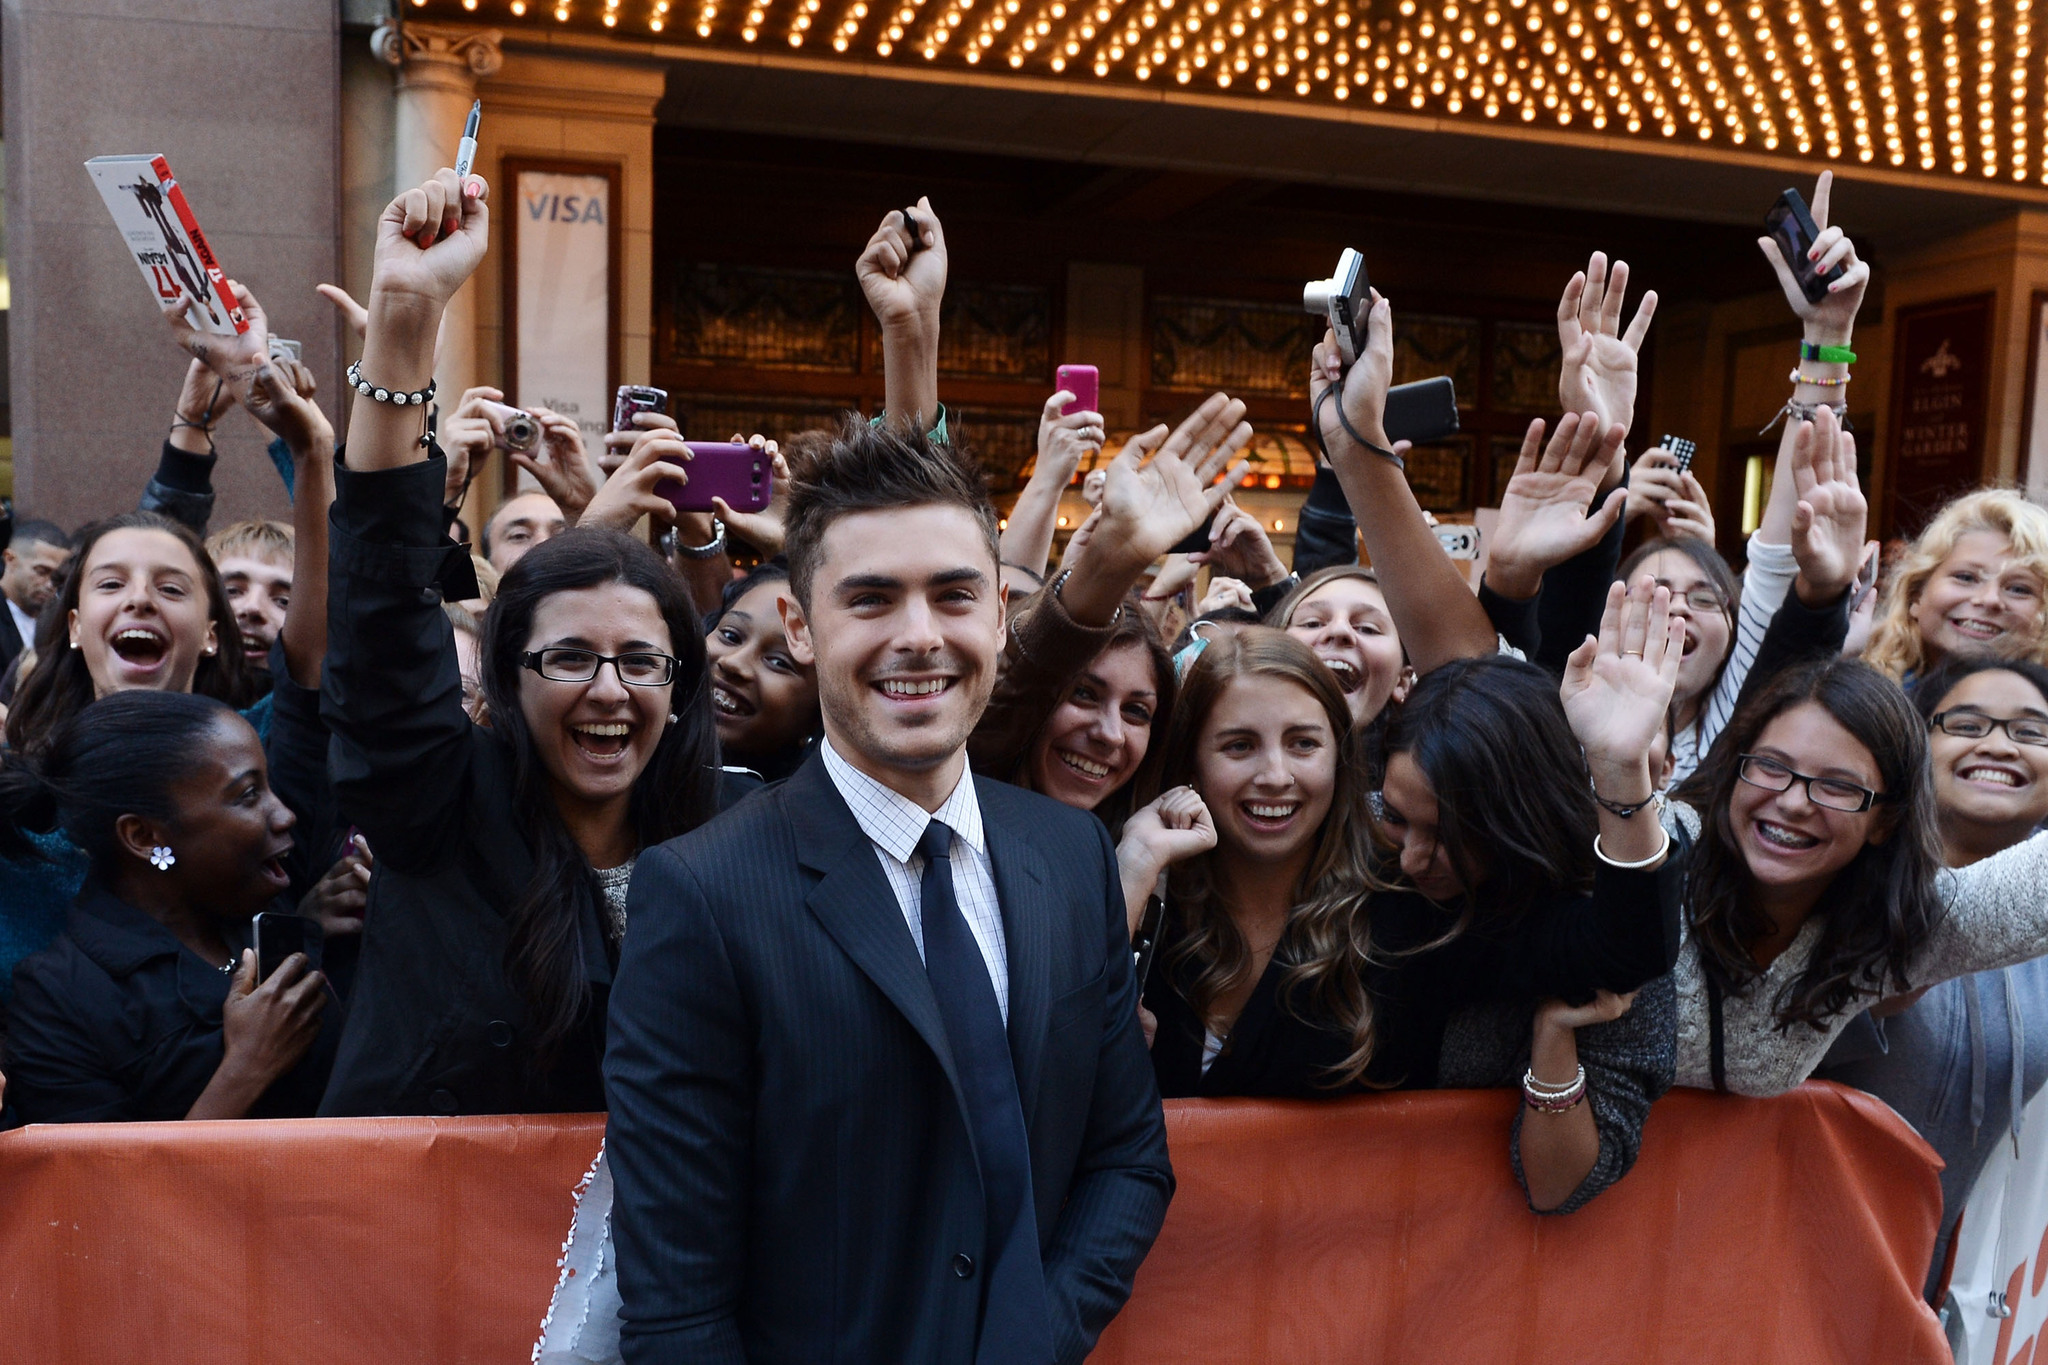 Zac Efron at event of The Paperboy (2012)